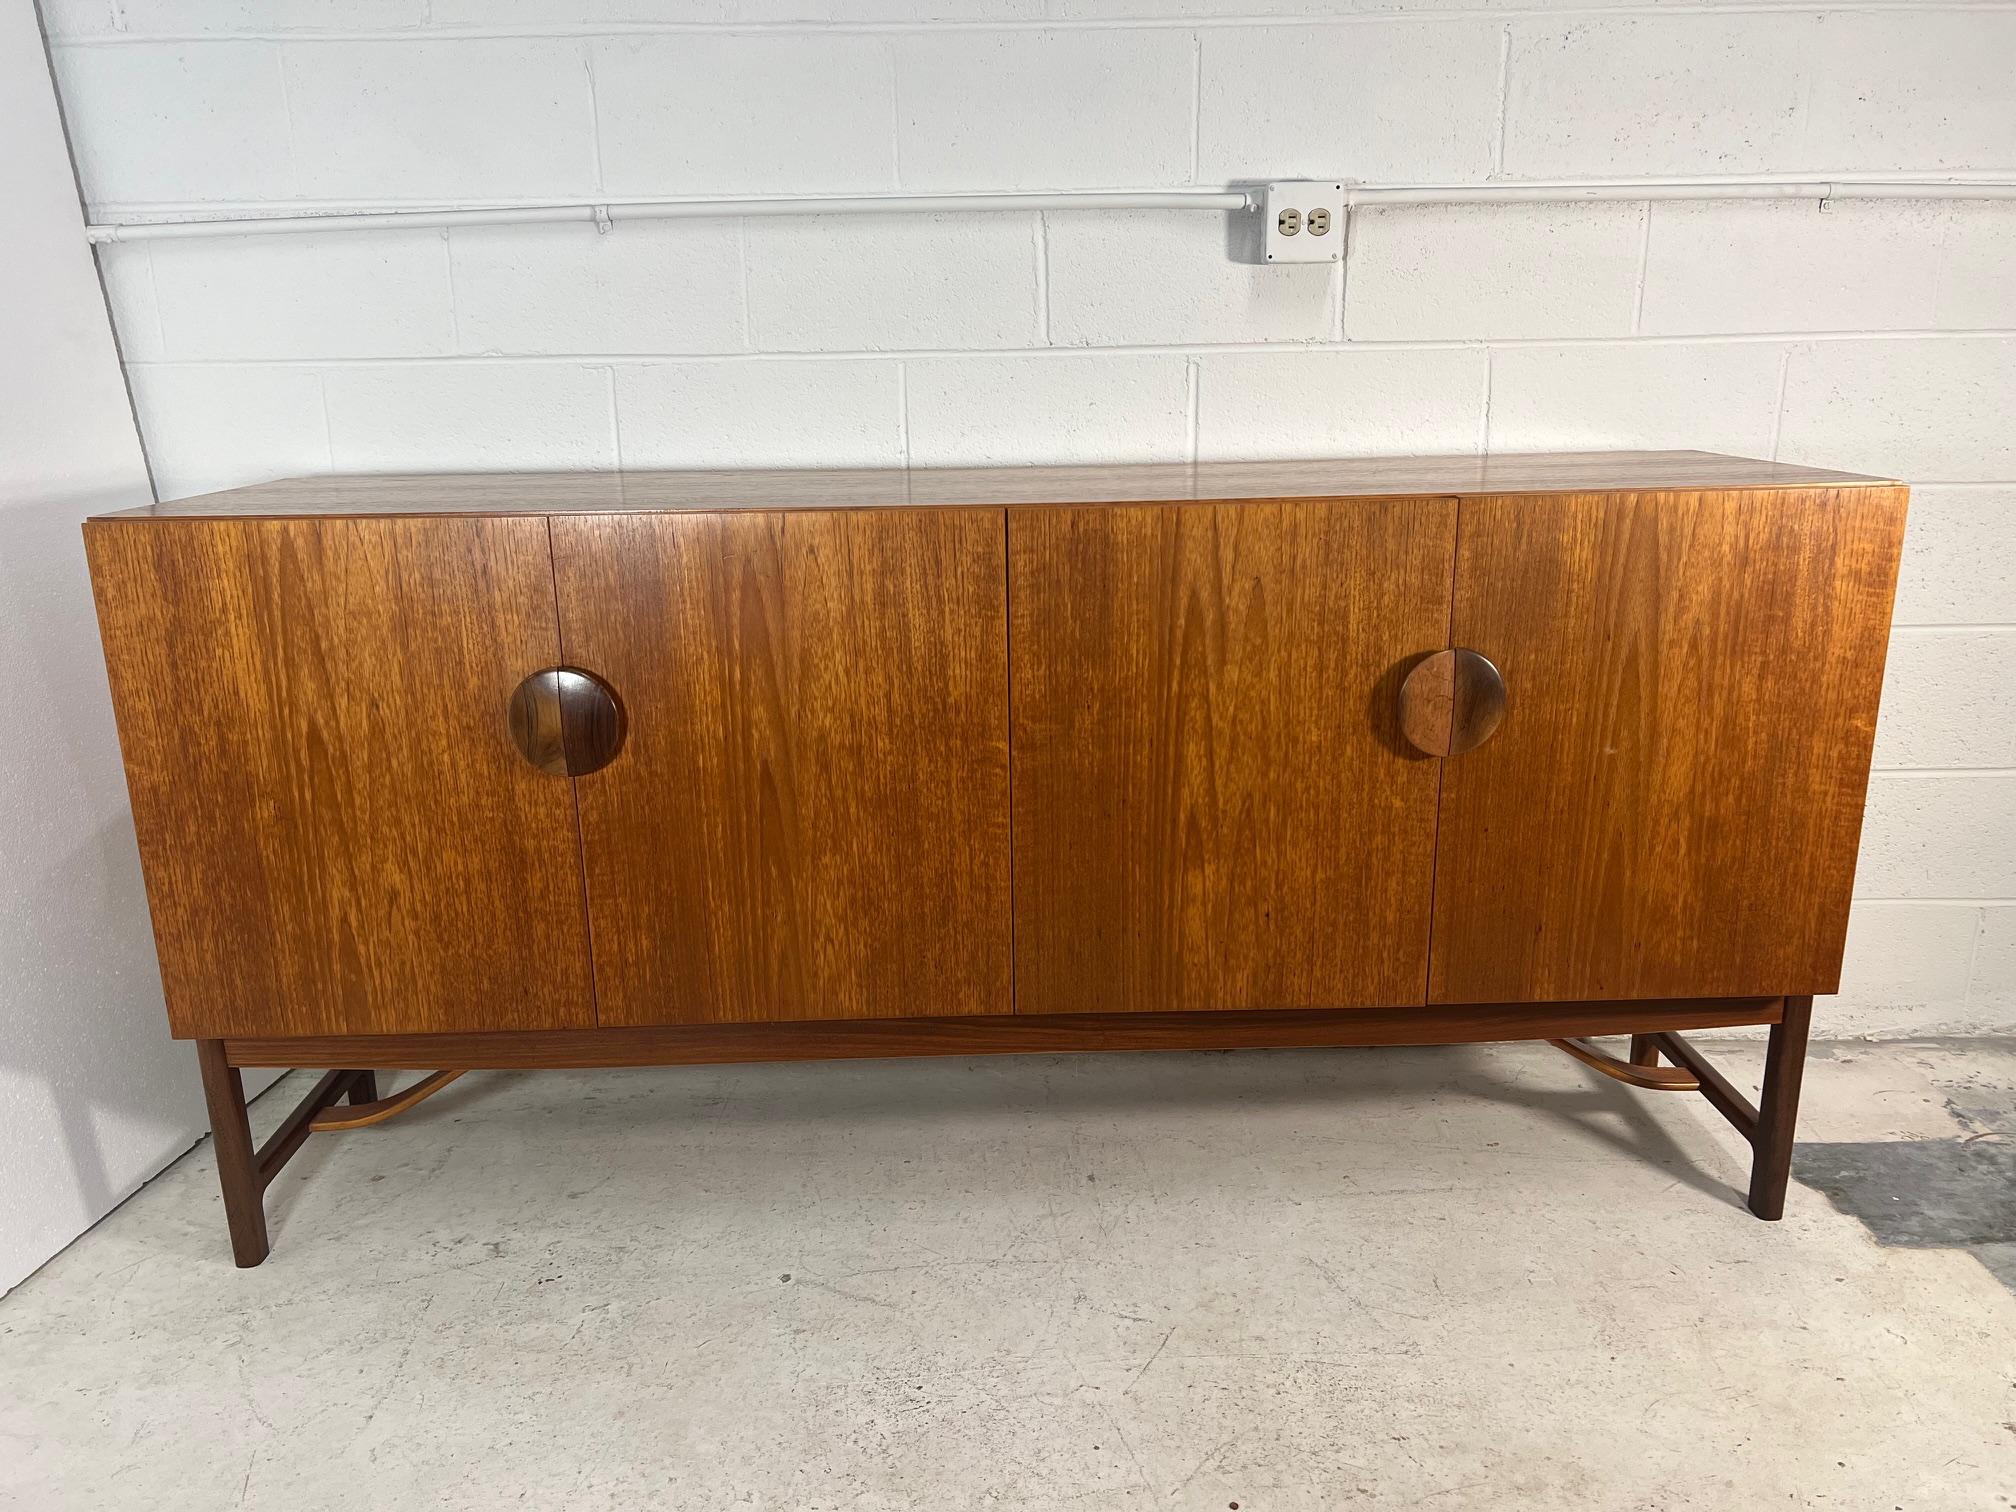 Stunning mid century teak credenza designed by renowned Danish designer Ib Kofod Larsen for G Plan. Designed in the 60s as part of the 'Danish Design Dining Group'. It comes with Bombay rosewood split handles.

Lots of storage room inside. An